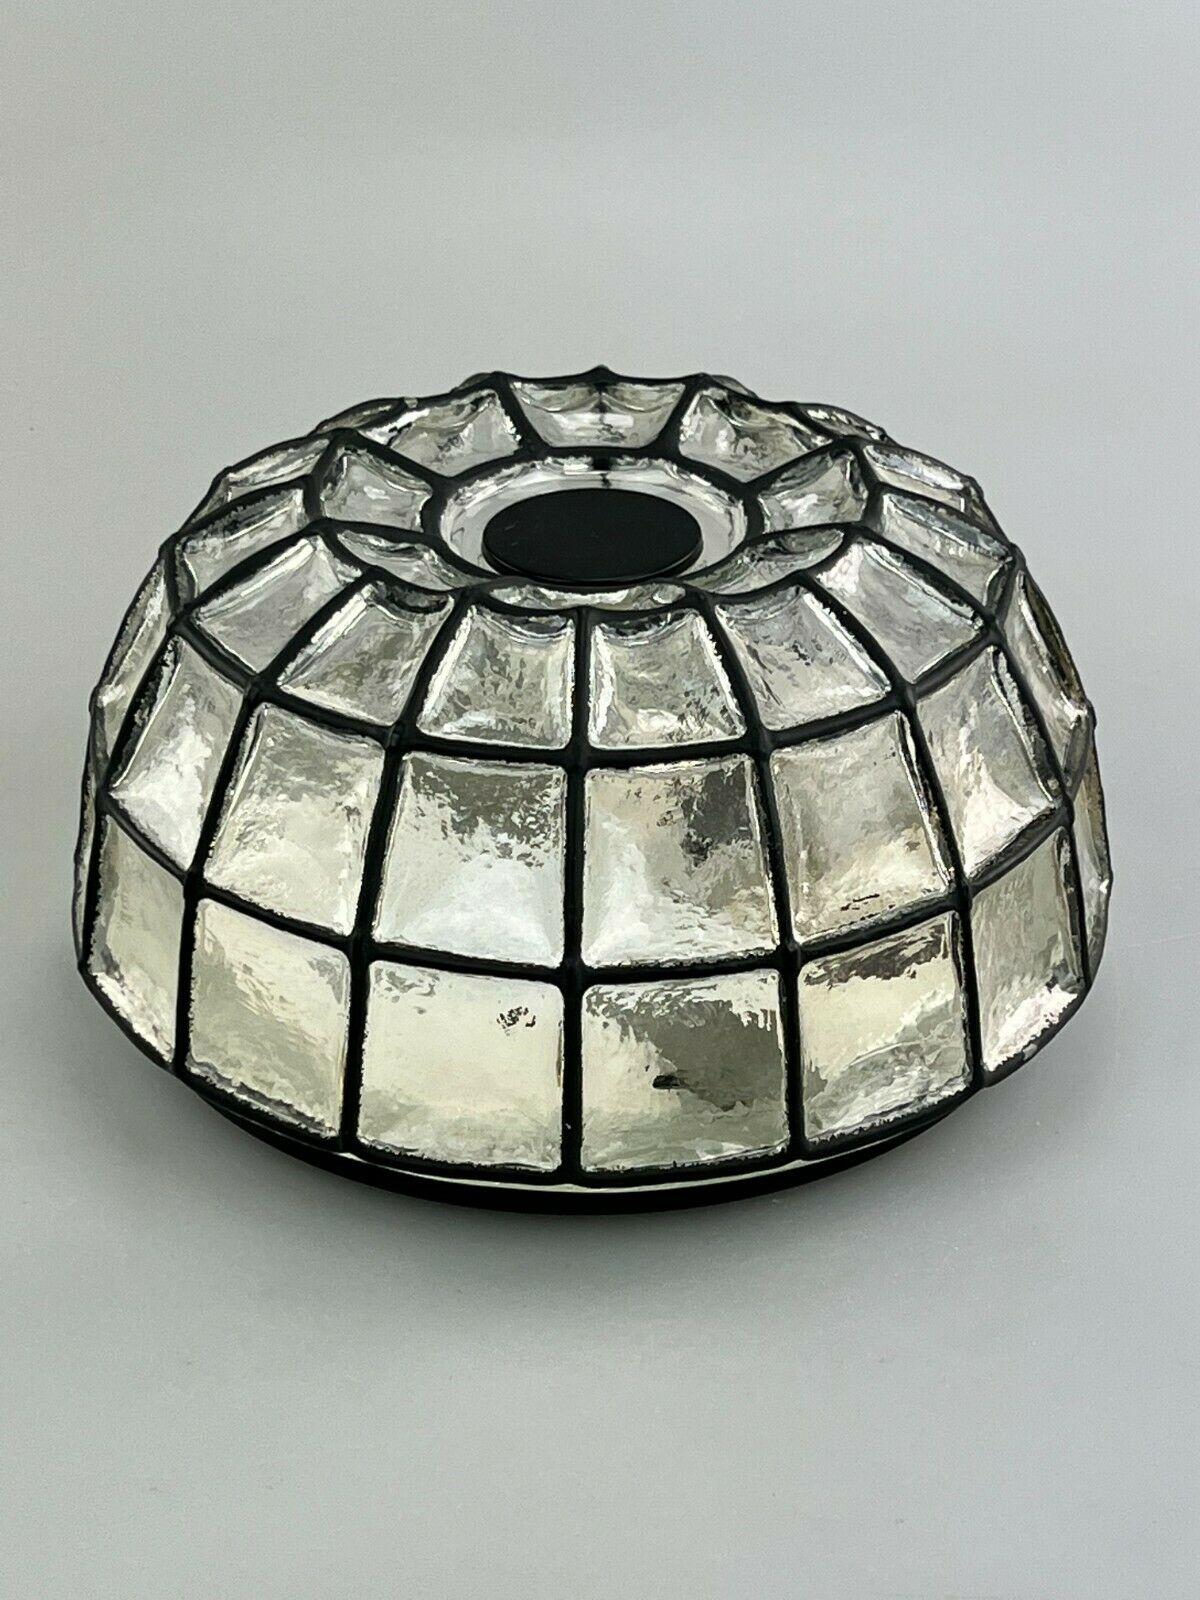 60s 70s lamp light ceiling lamp Limburg glass space age design 60s 70s

Object: ceiling lamp

Manufacturer: Glashütte Limburg

Condition: good

Age: around 1960-1970

Dimensions:

Diameter = 25cm
Height = 13cm

Other notes:

The